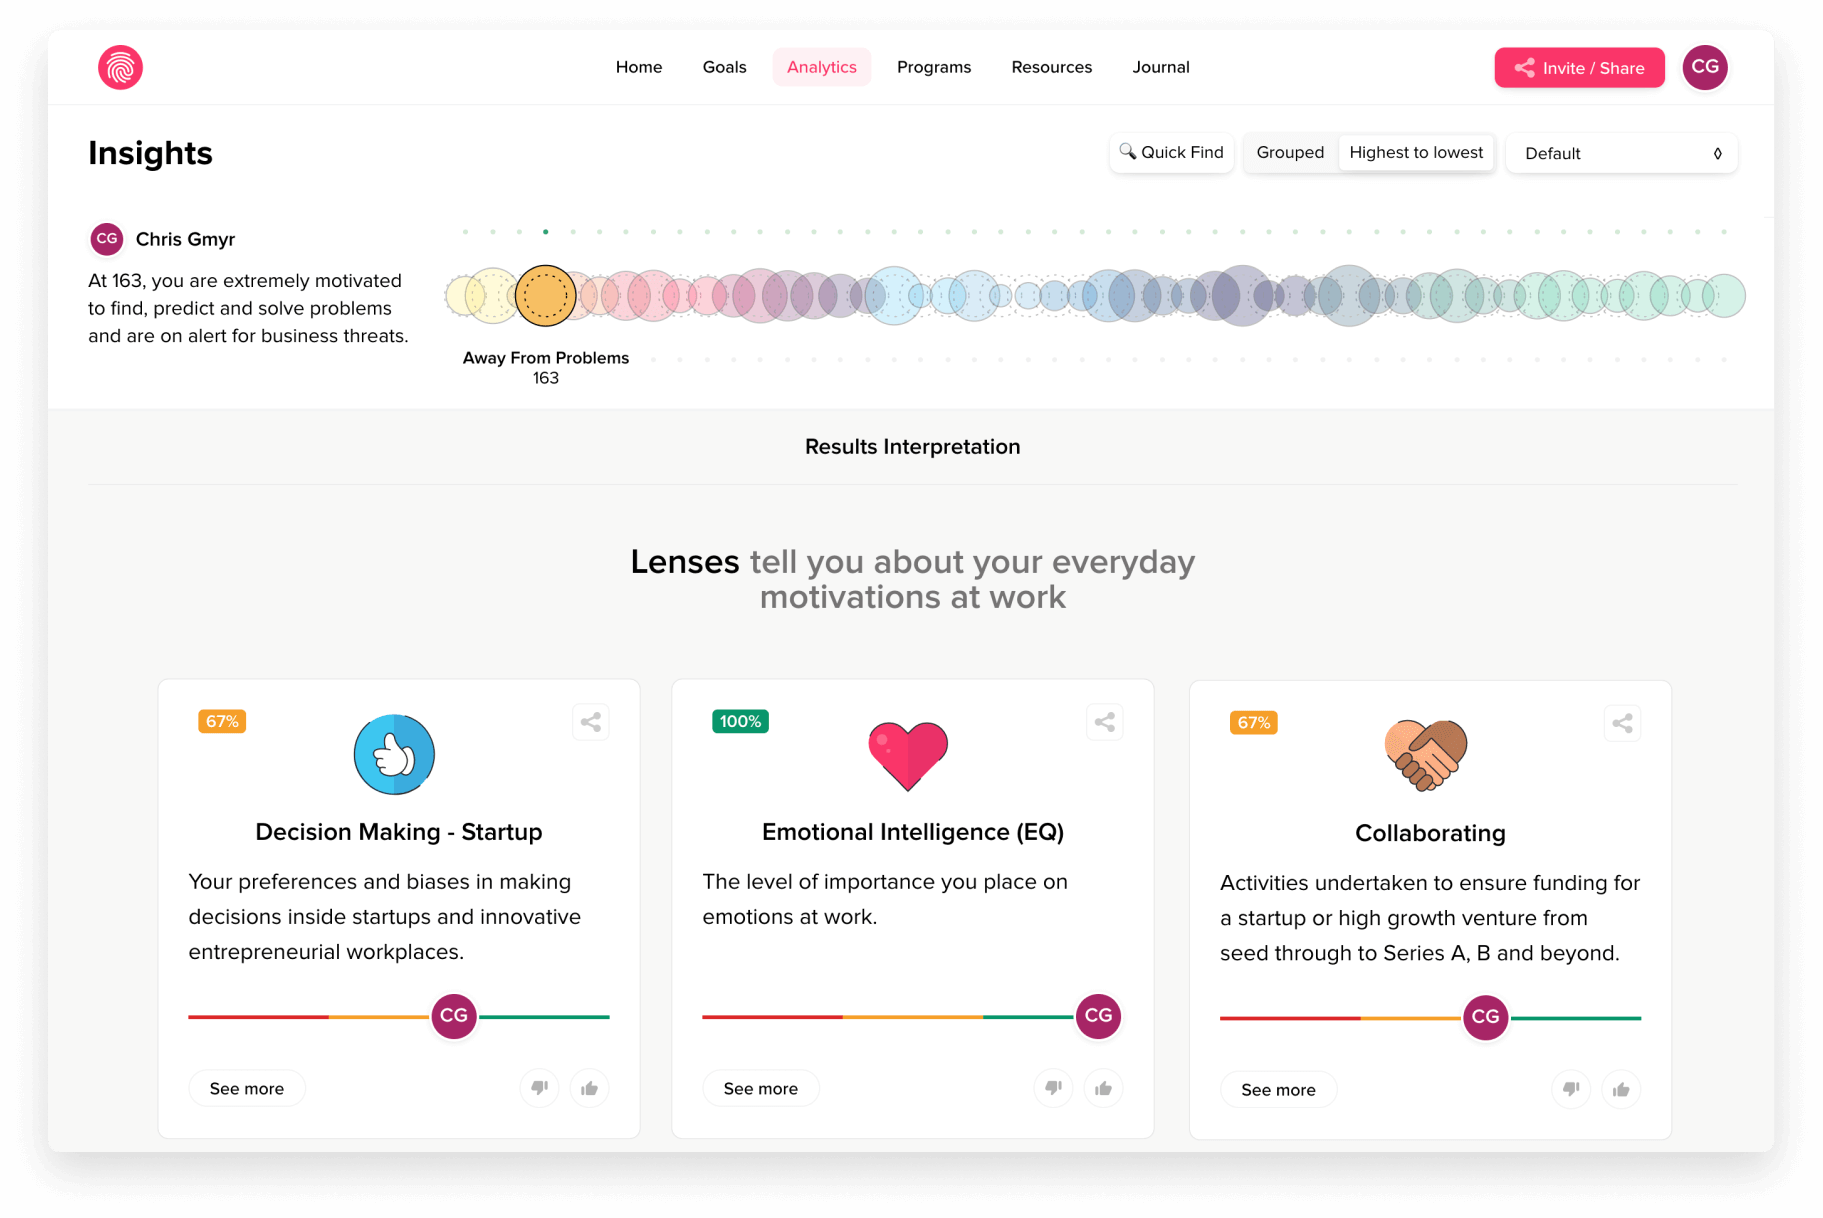 F4S dashboard giving an overview 